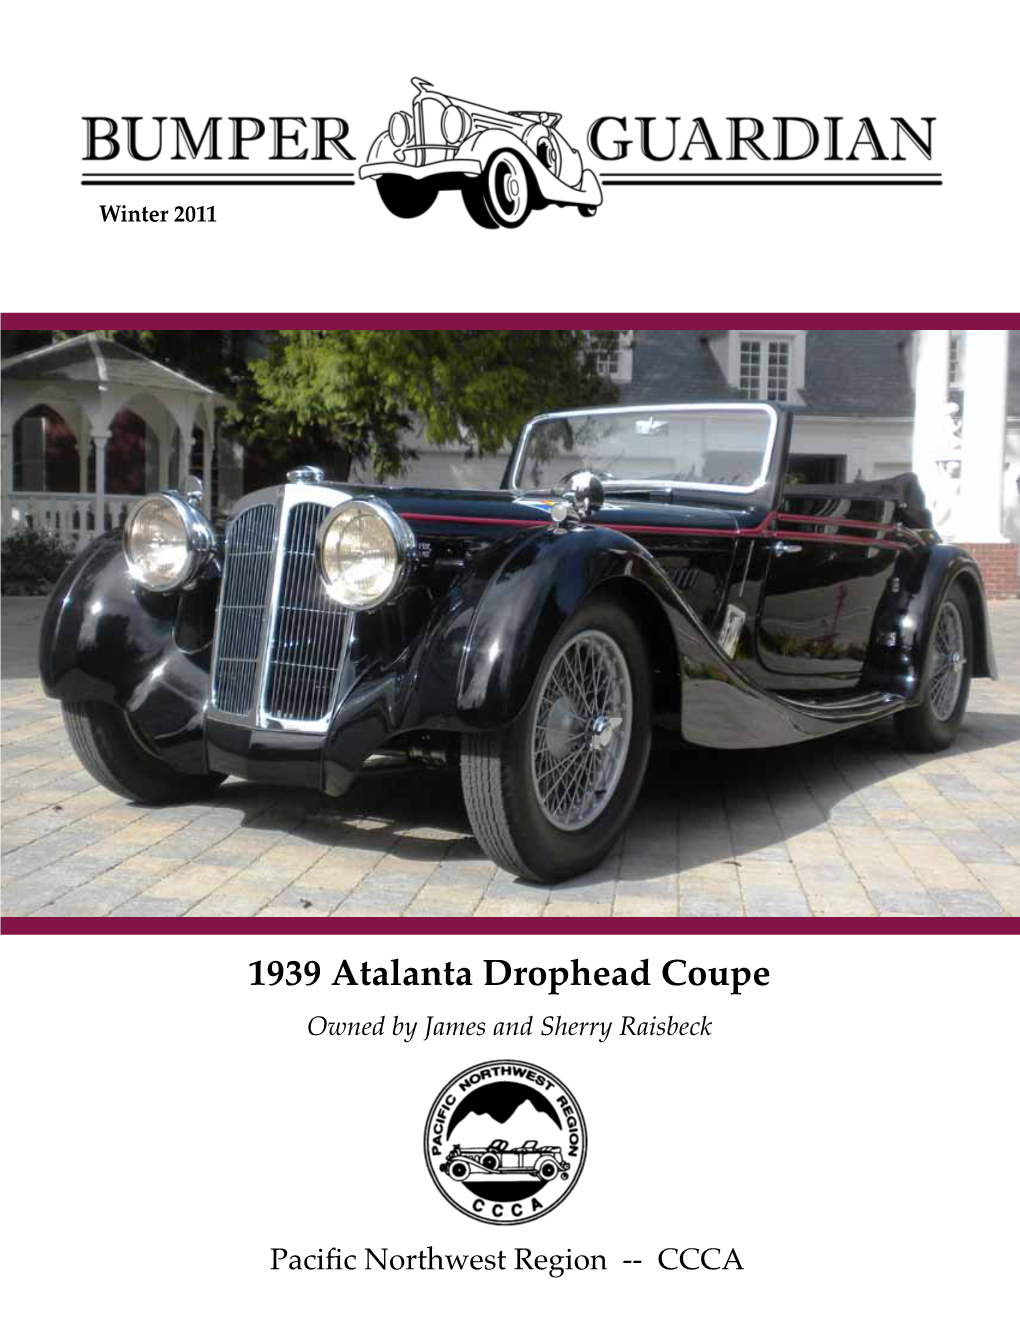 1939 Atalanta Drophead Coupe Owned by James and Sherry Raisbeck